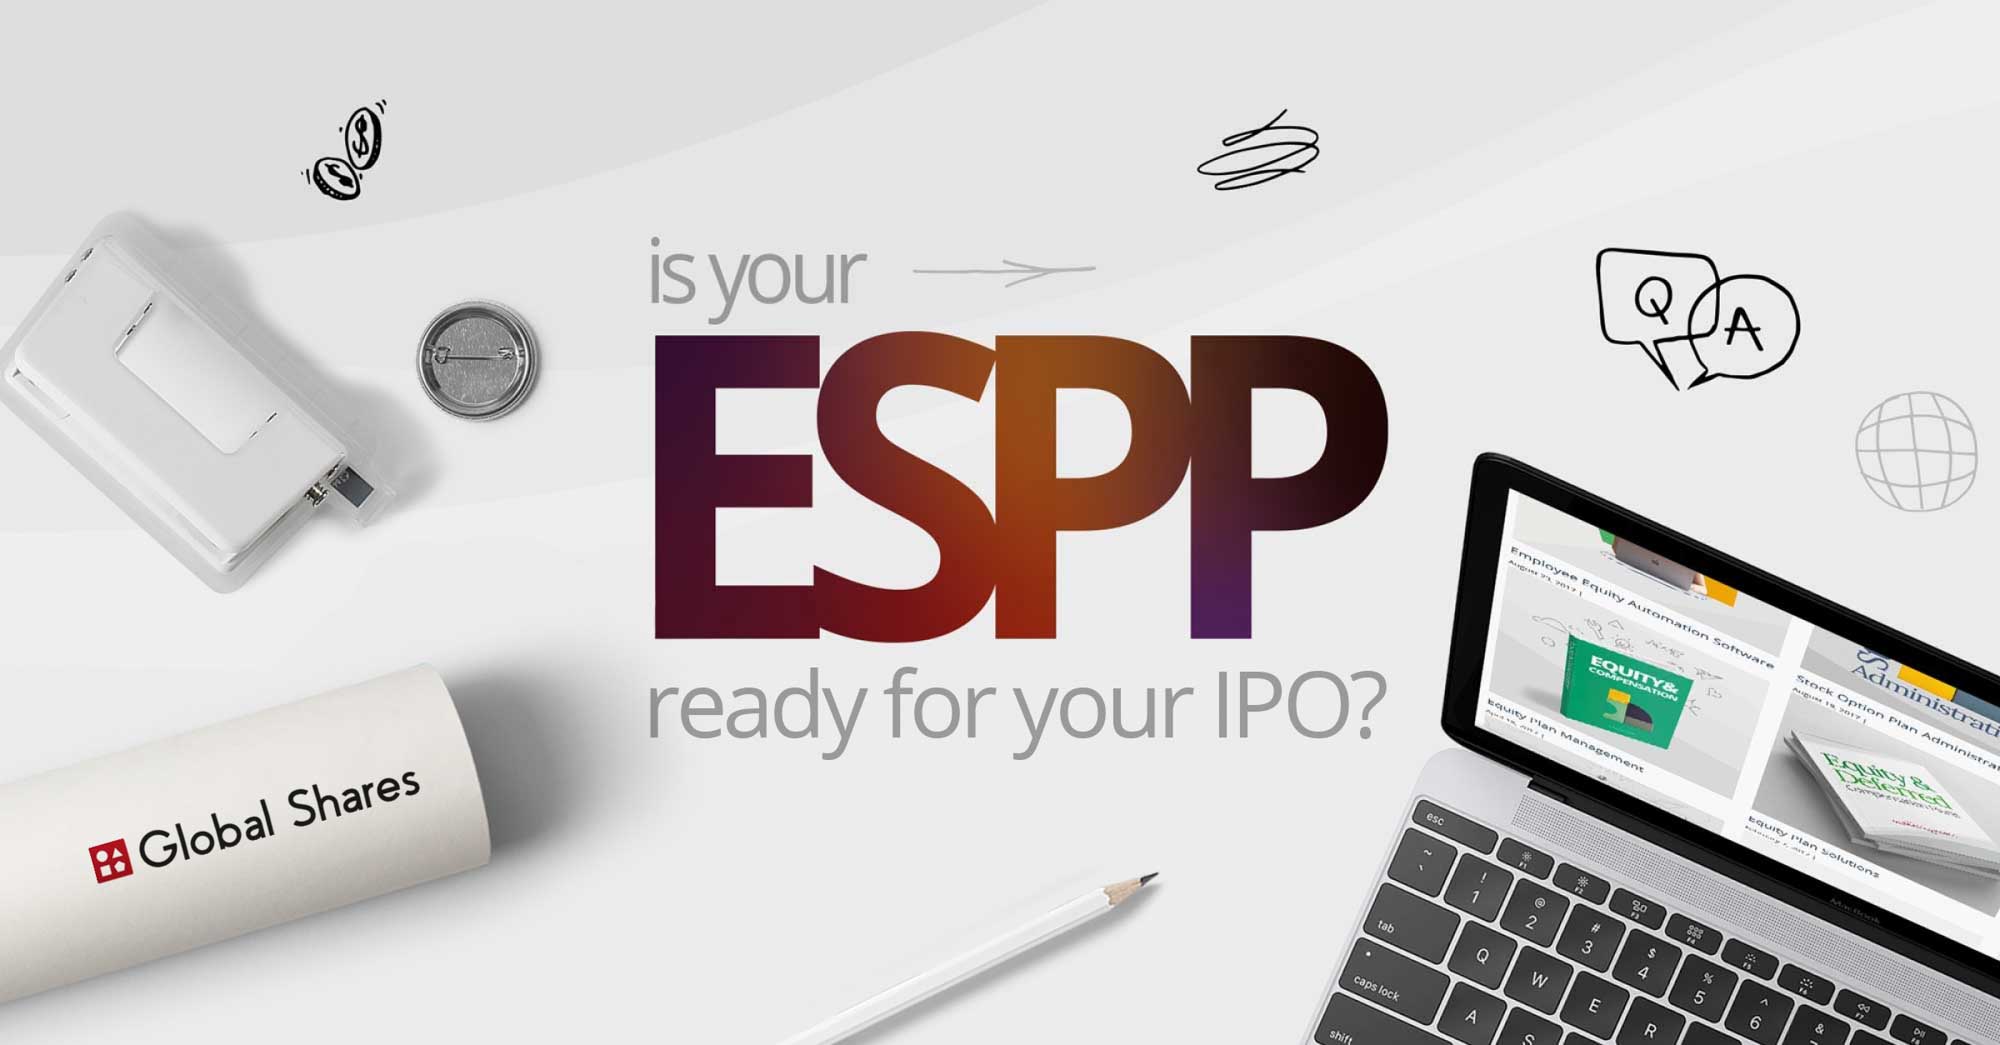 Is your ESPP ready for your IPO?